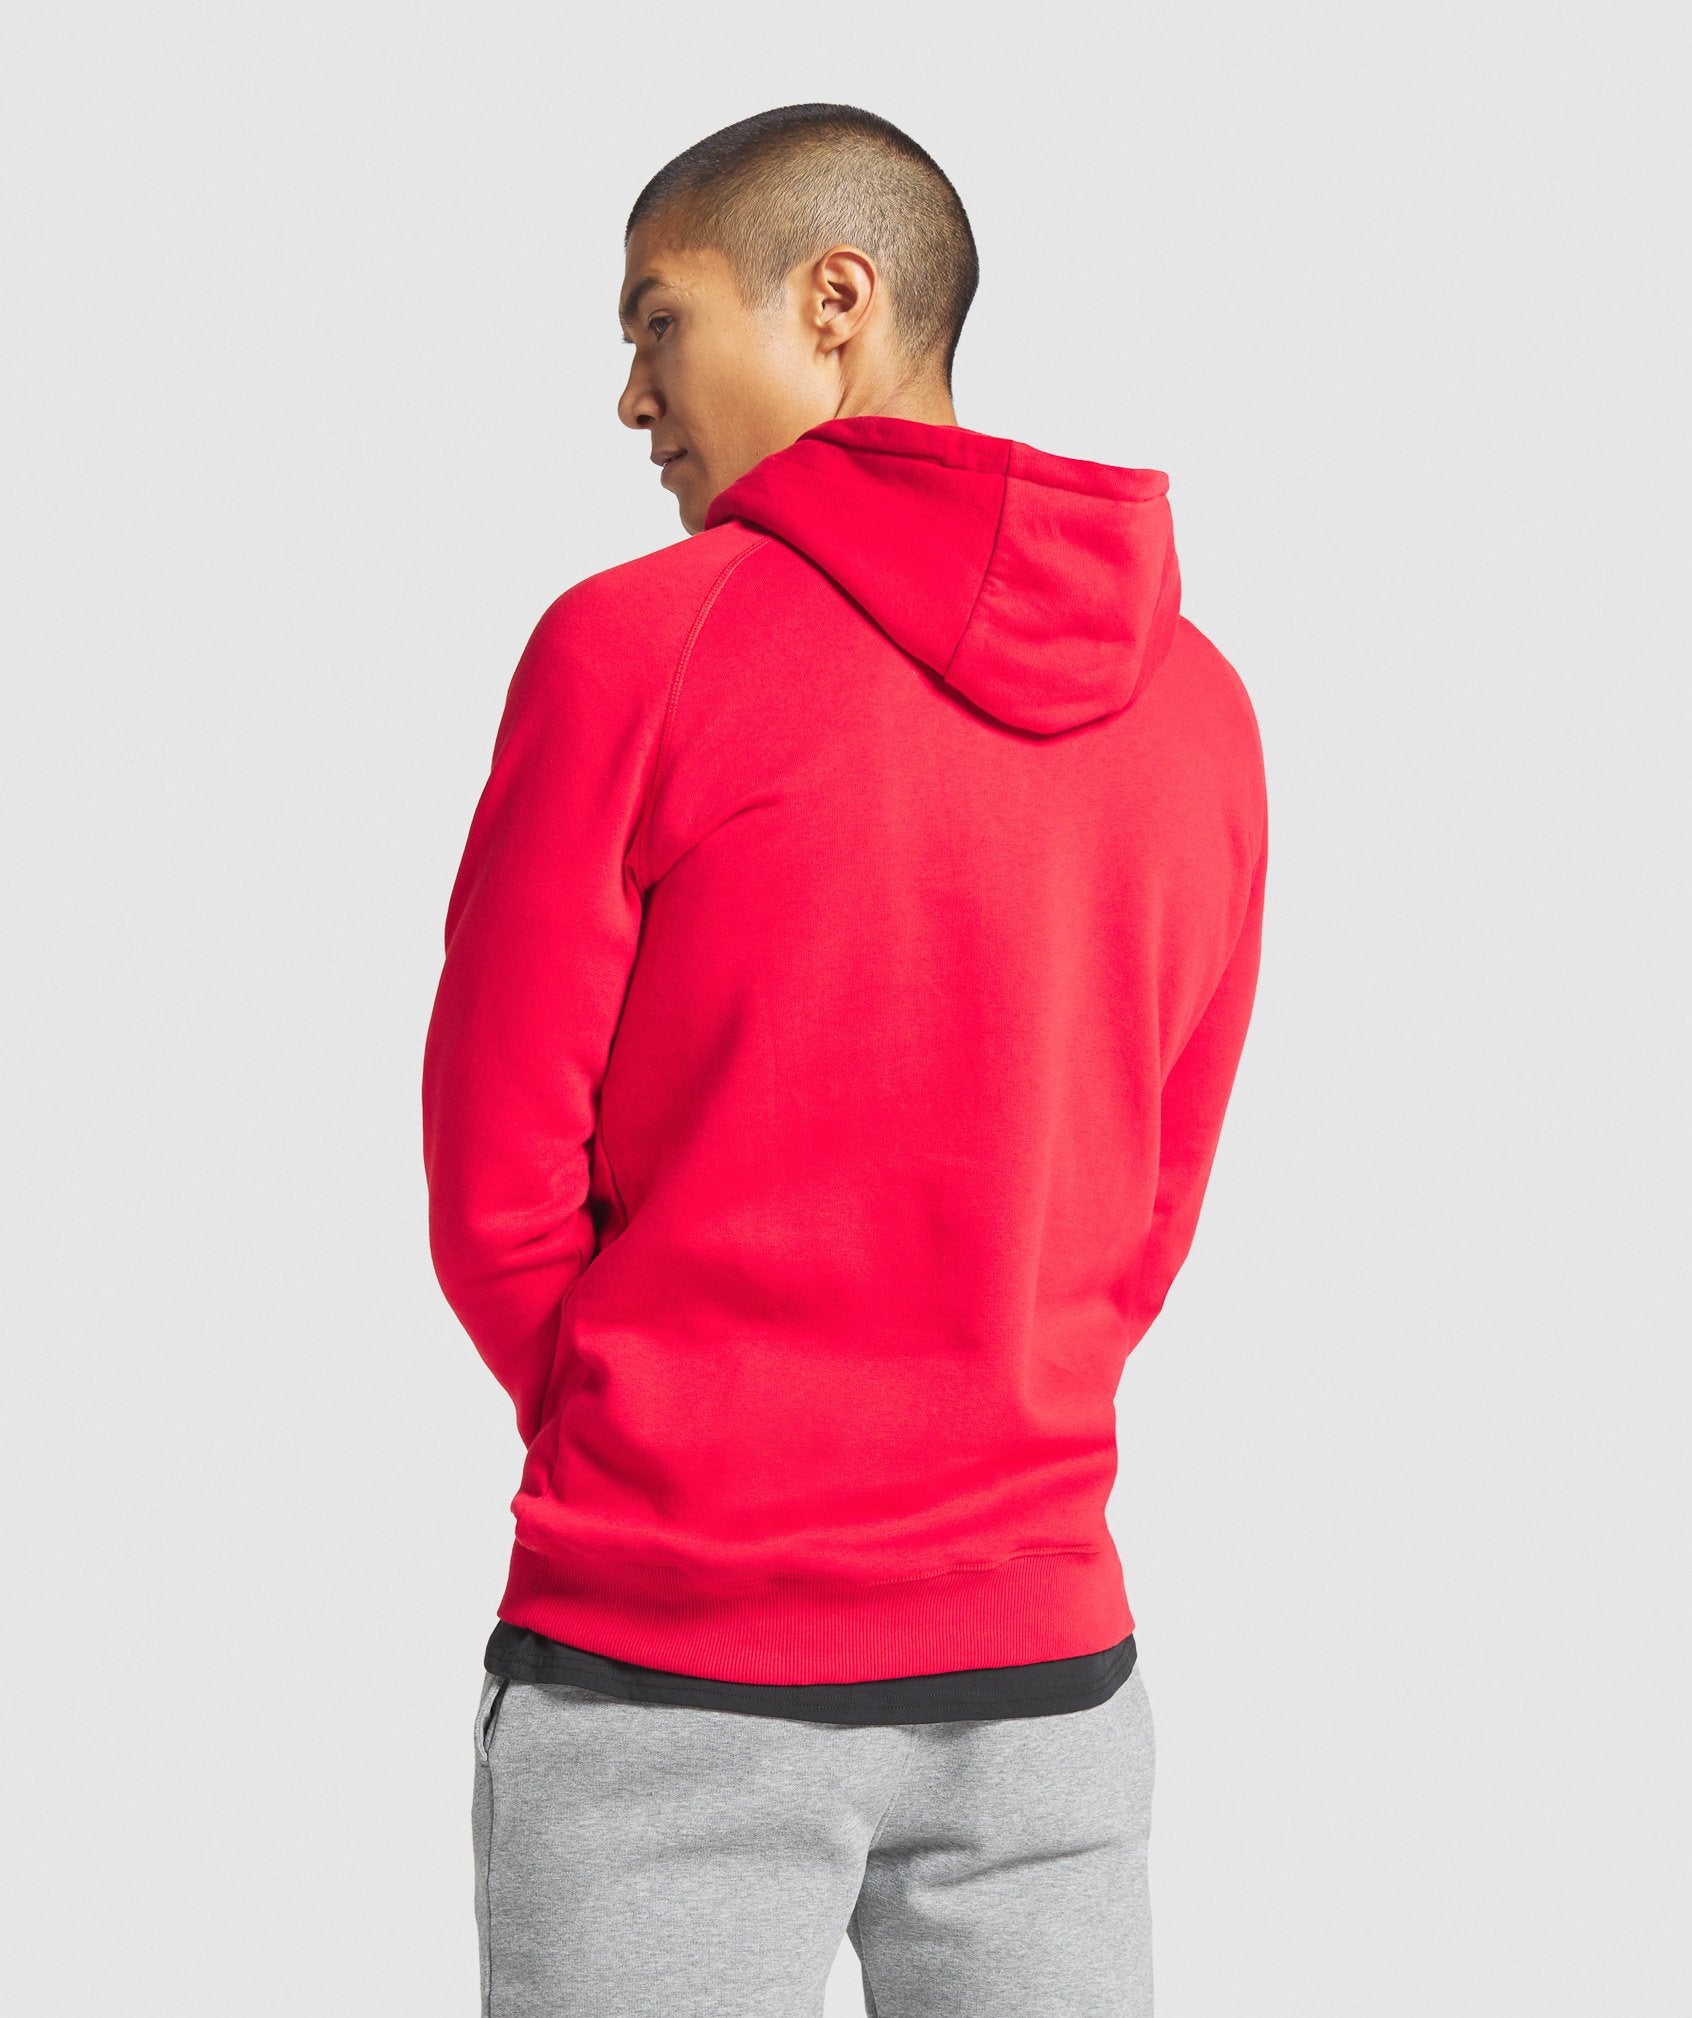 Crest Hoodie in Red - view 3